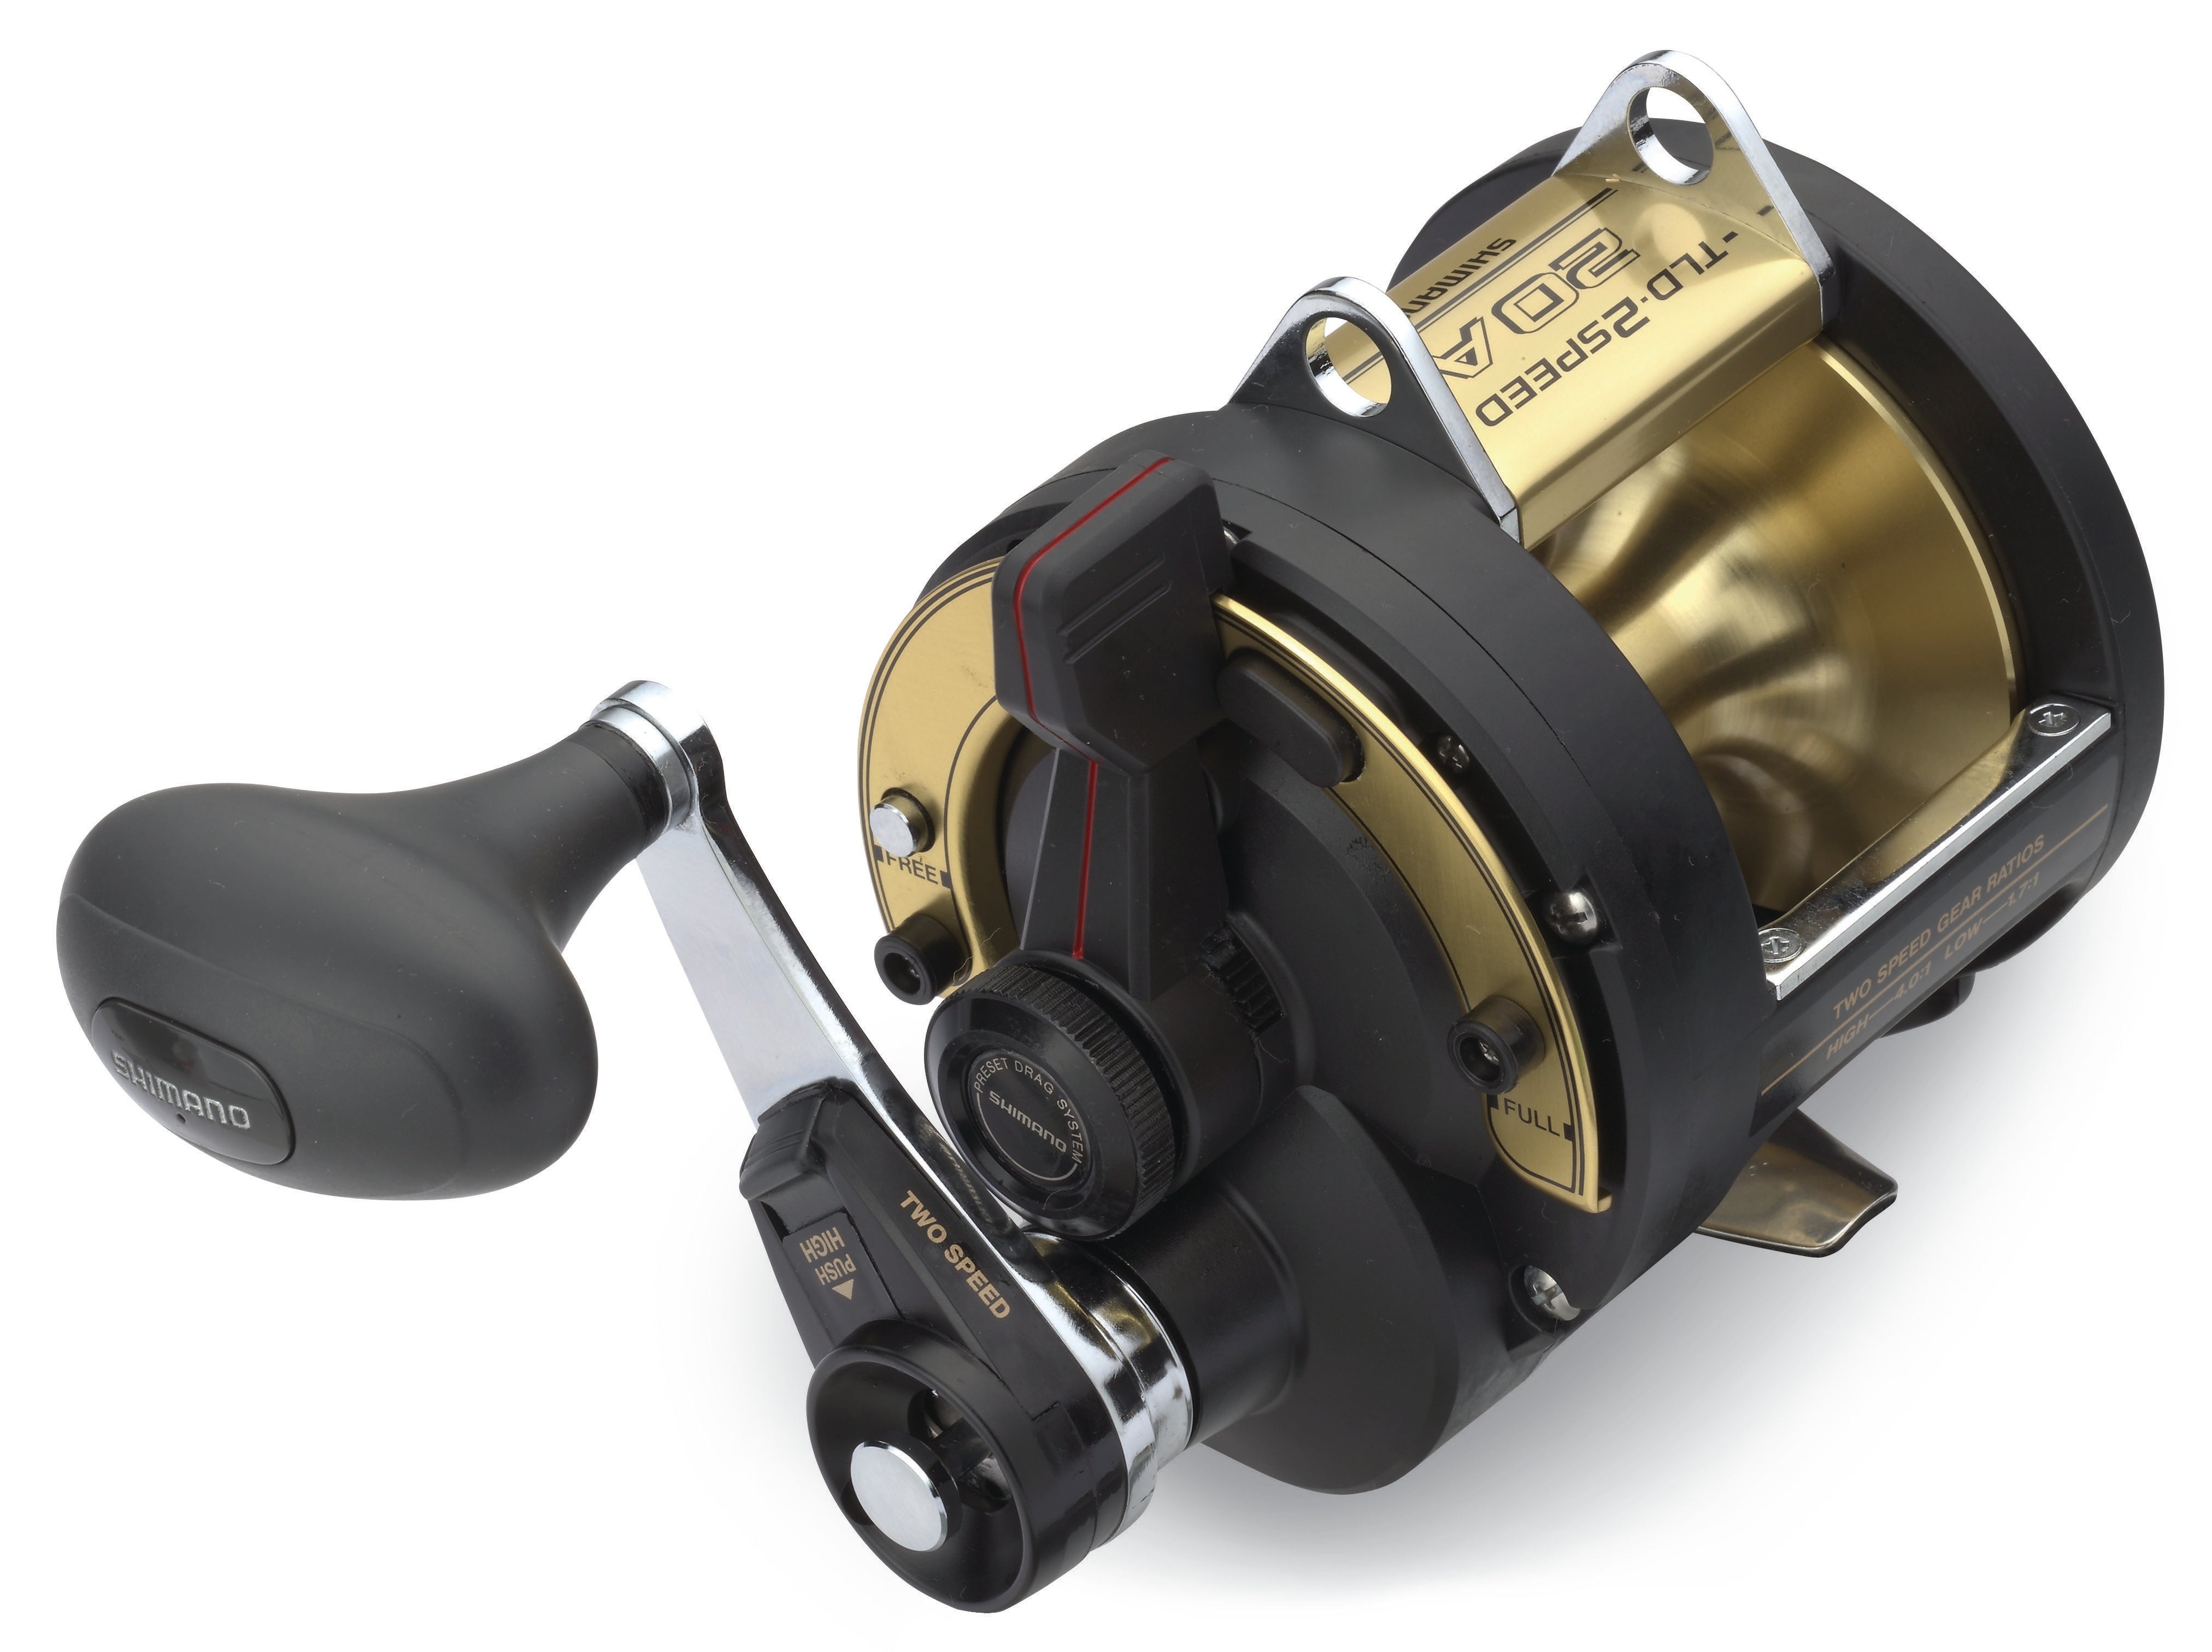 One Bass Fishing Reels Level Wind Trolling Reel Conventional Jigging Reel for Saltwater Big Game Fishing-TA5000 Silver-Gold-Rig